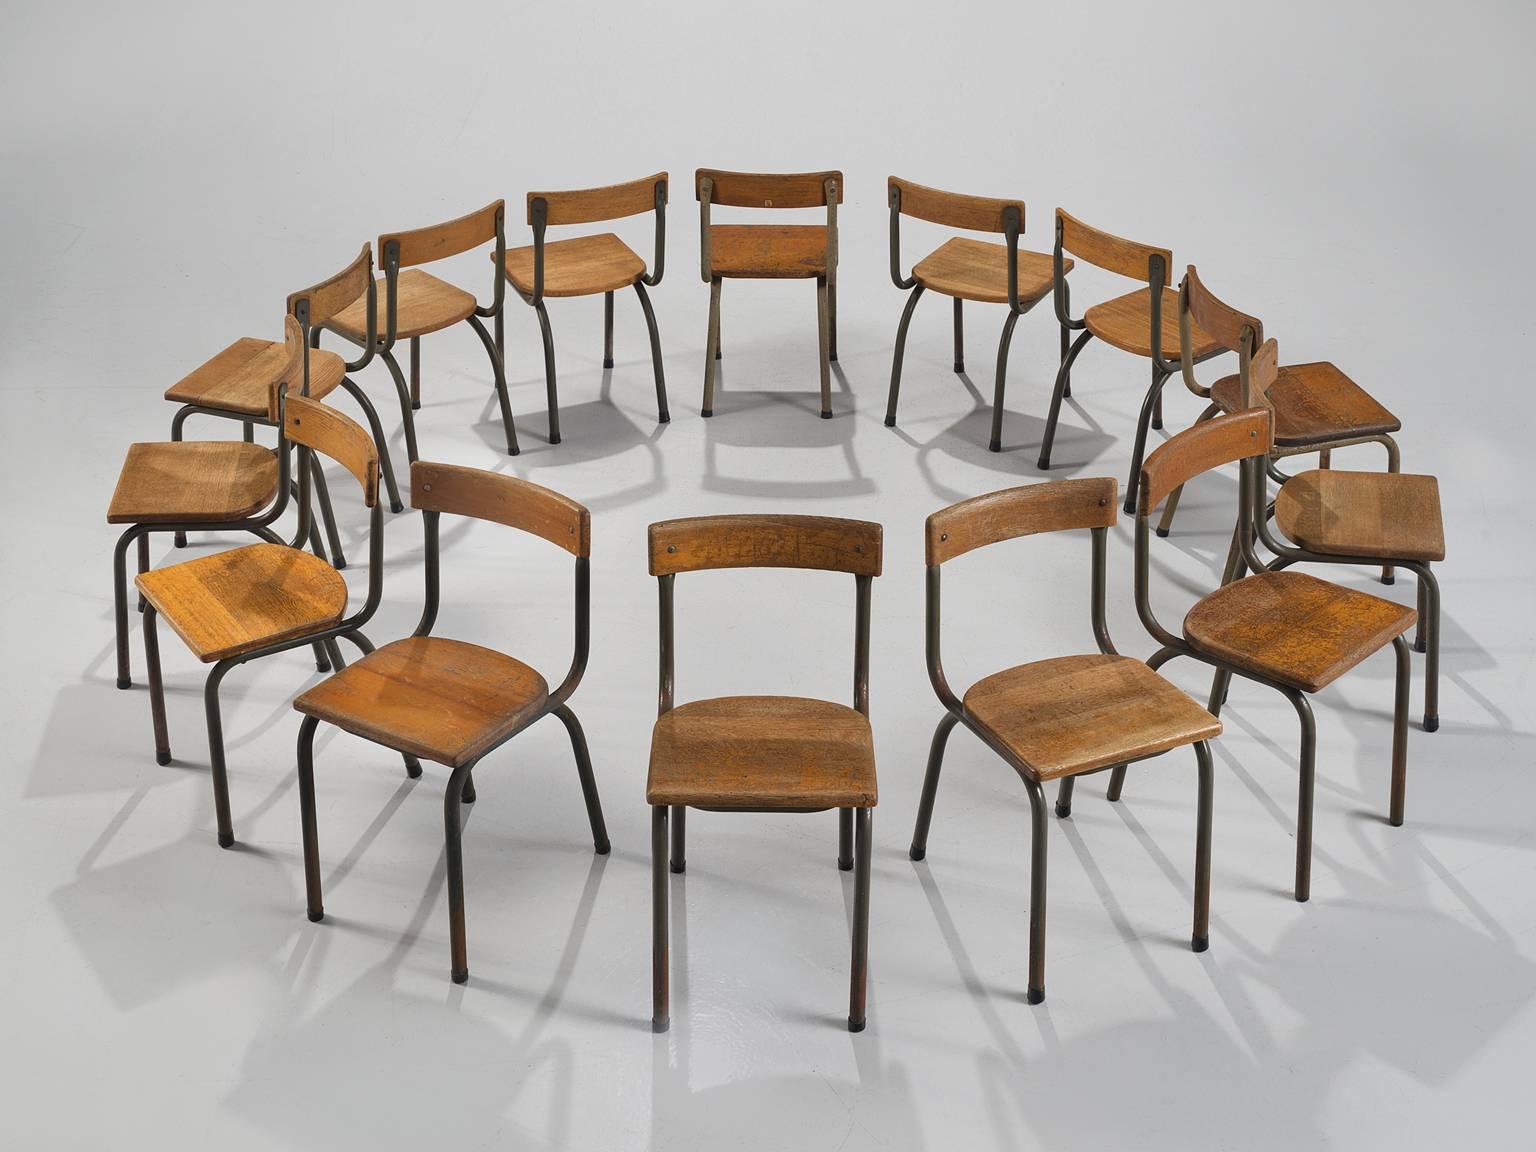 Willy Van Der Meeren, set of 14 chairs, steel and wood, Belgium, 1957.

This set of Industrial Belgian chairs is designed by the Belgian designer Willy Van Der Meeren. The exceptional elements of these chairs is the fact that they are made of solid